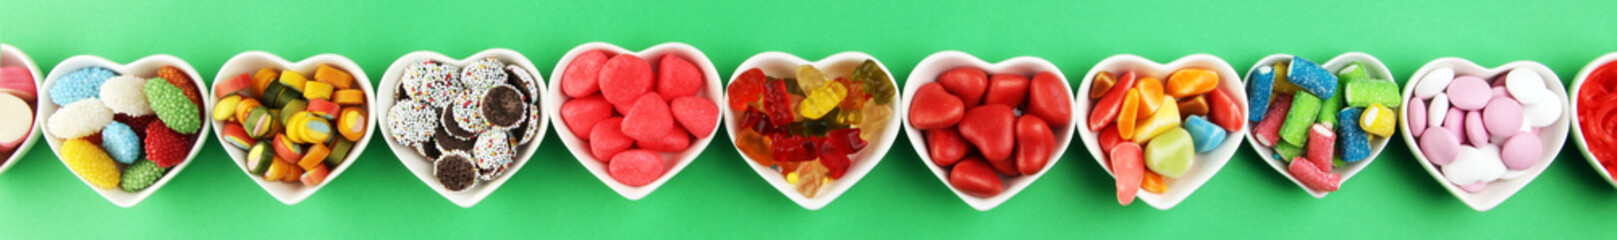 candies with jelly and sugar. colorful array of different childs sweets and treats on green...